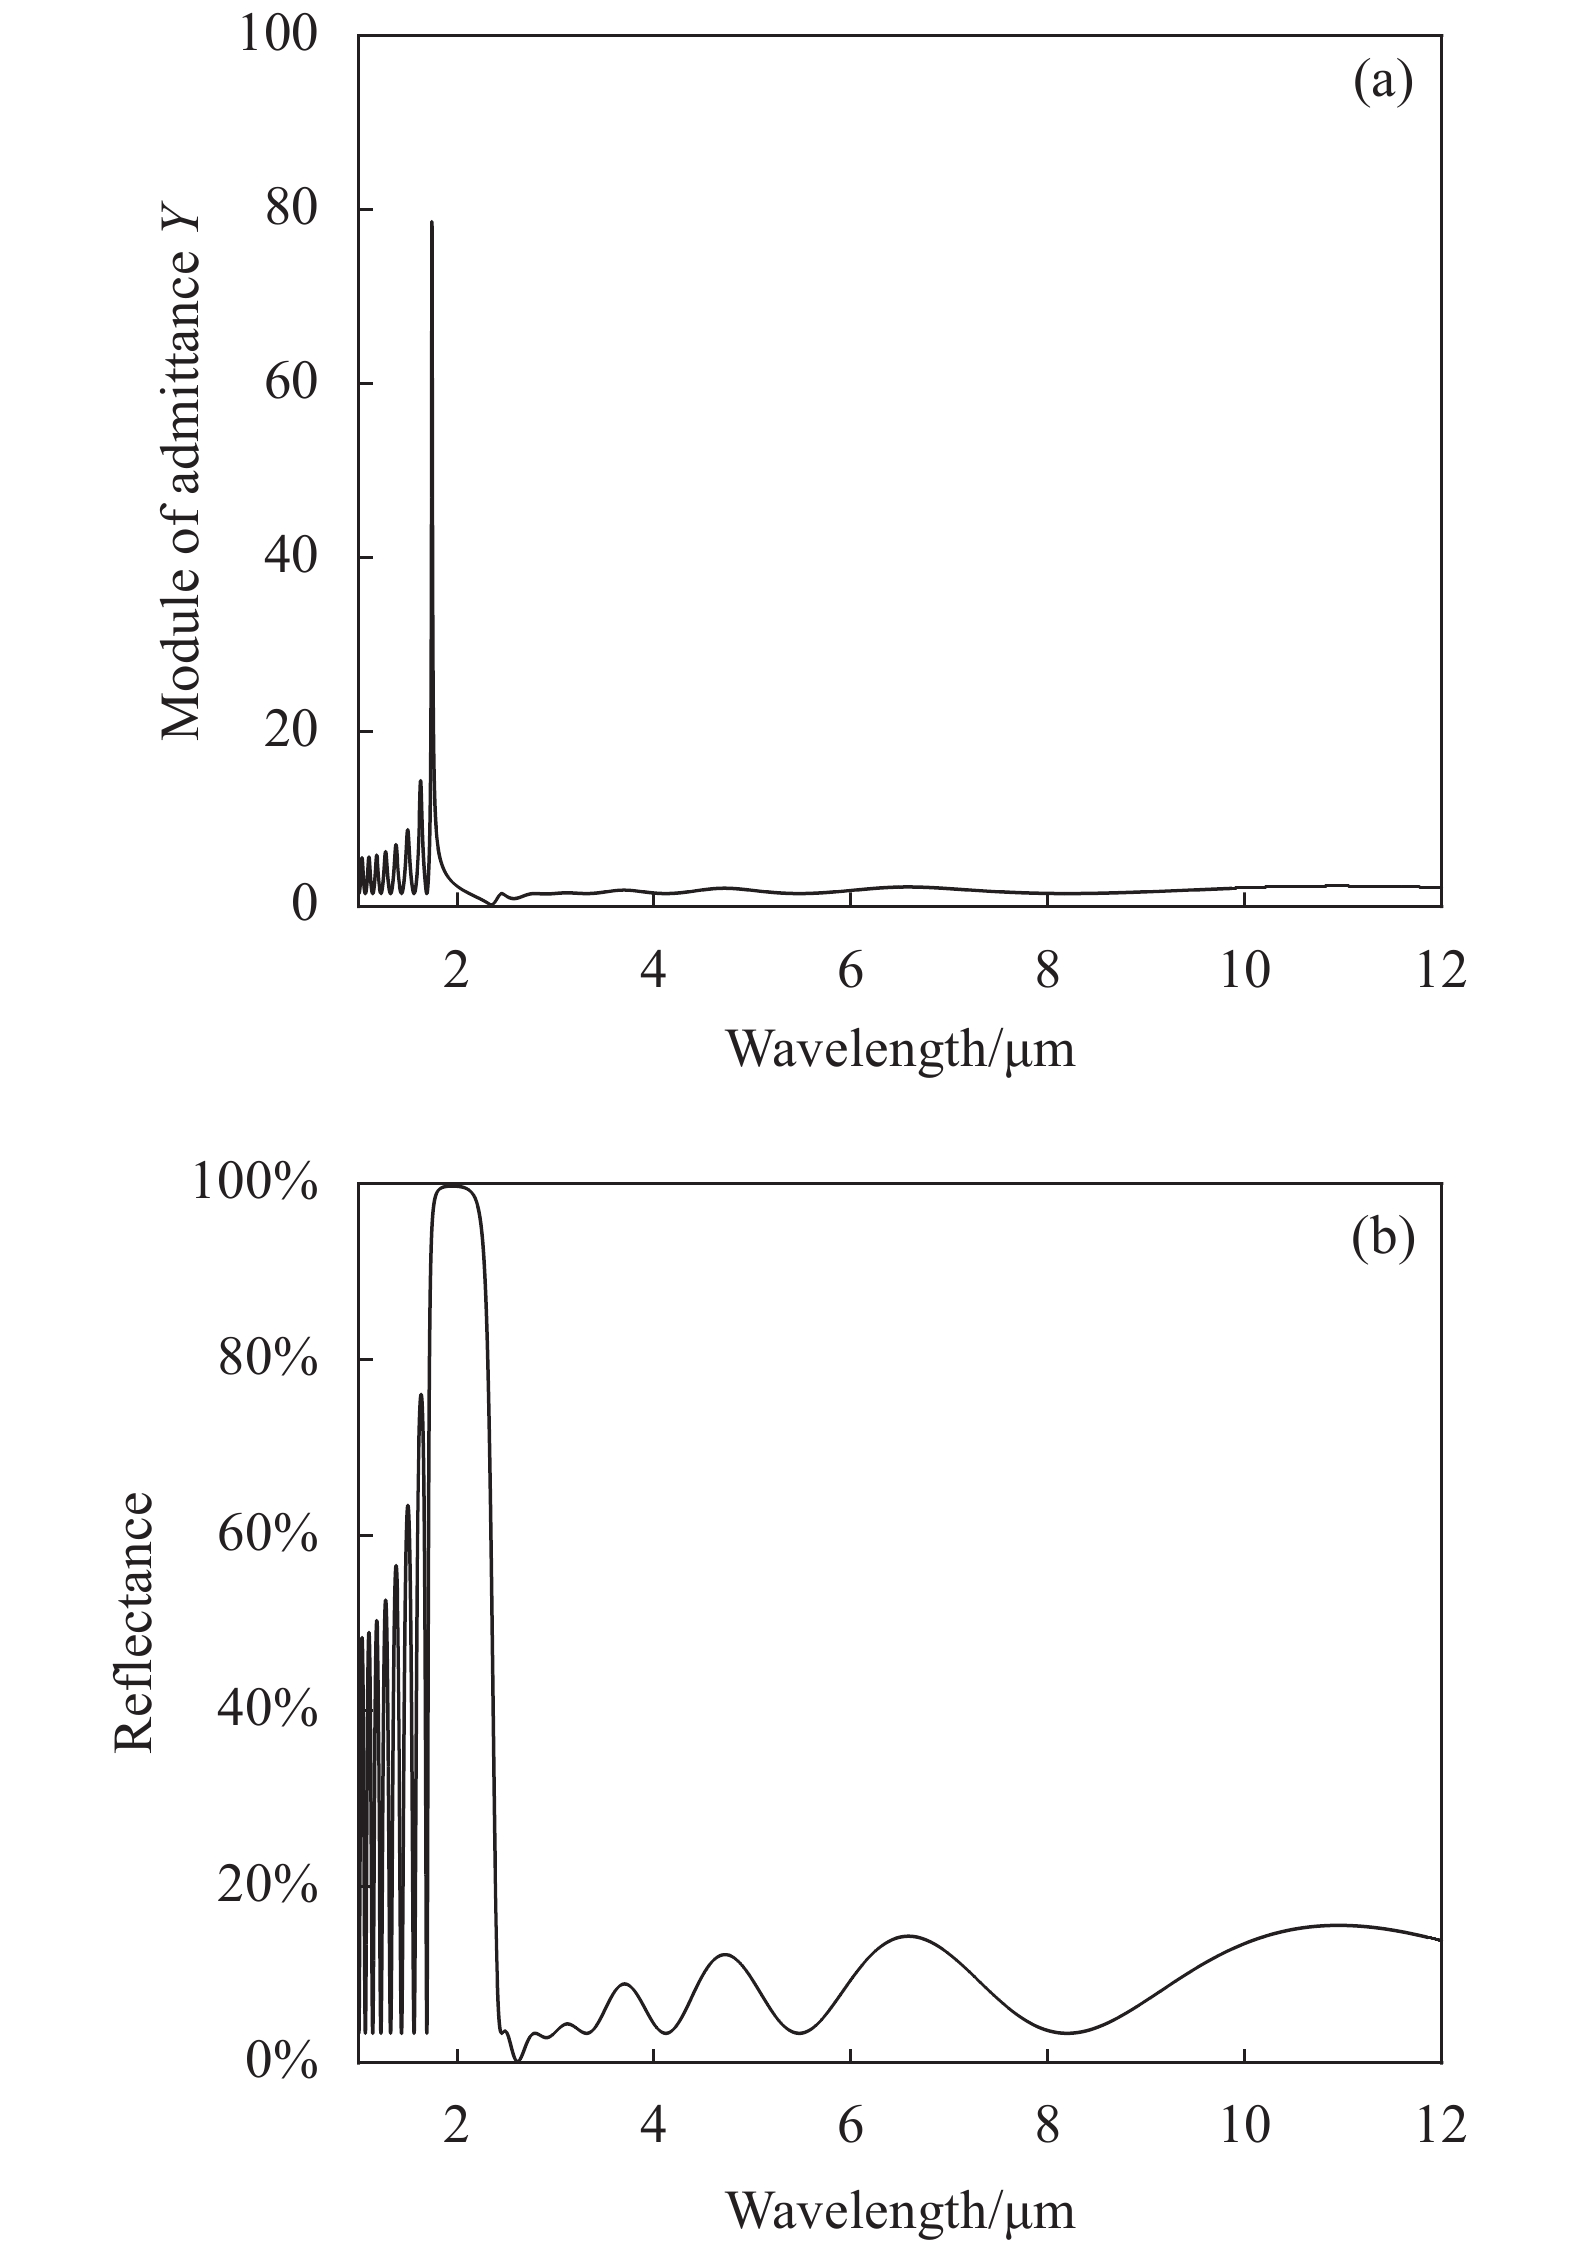 (a) Curve of admittance of thin-film system with wavelength and (b) curve of reflectance of thin-film system with wavelength when λ0=2 000 nm and N=8